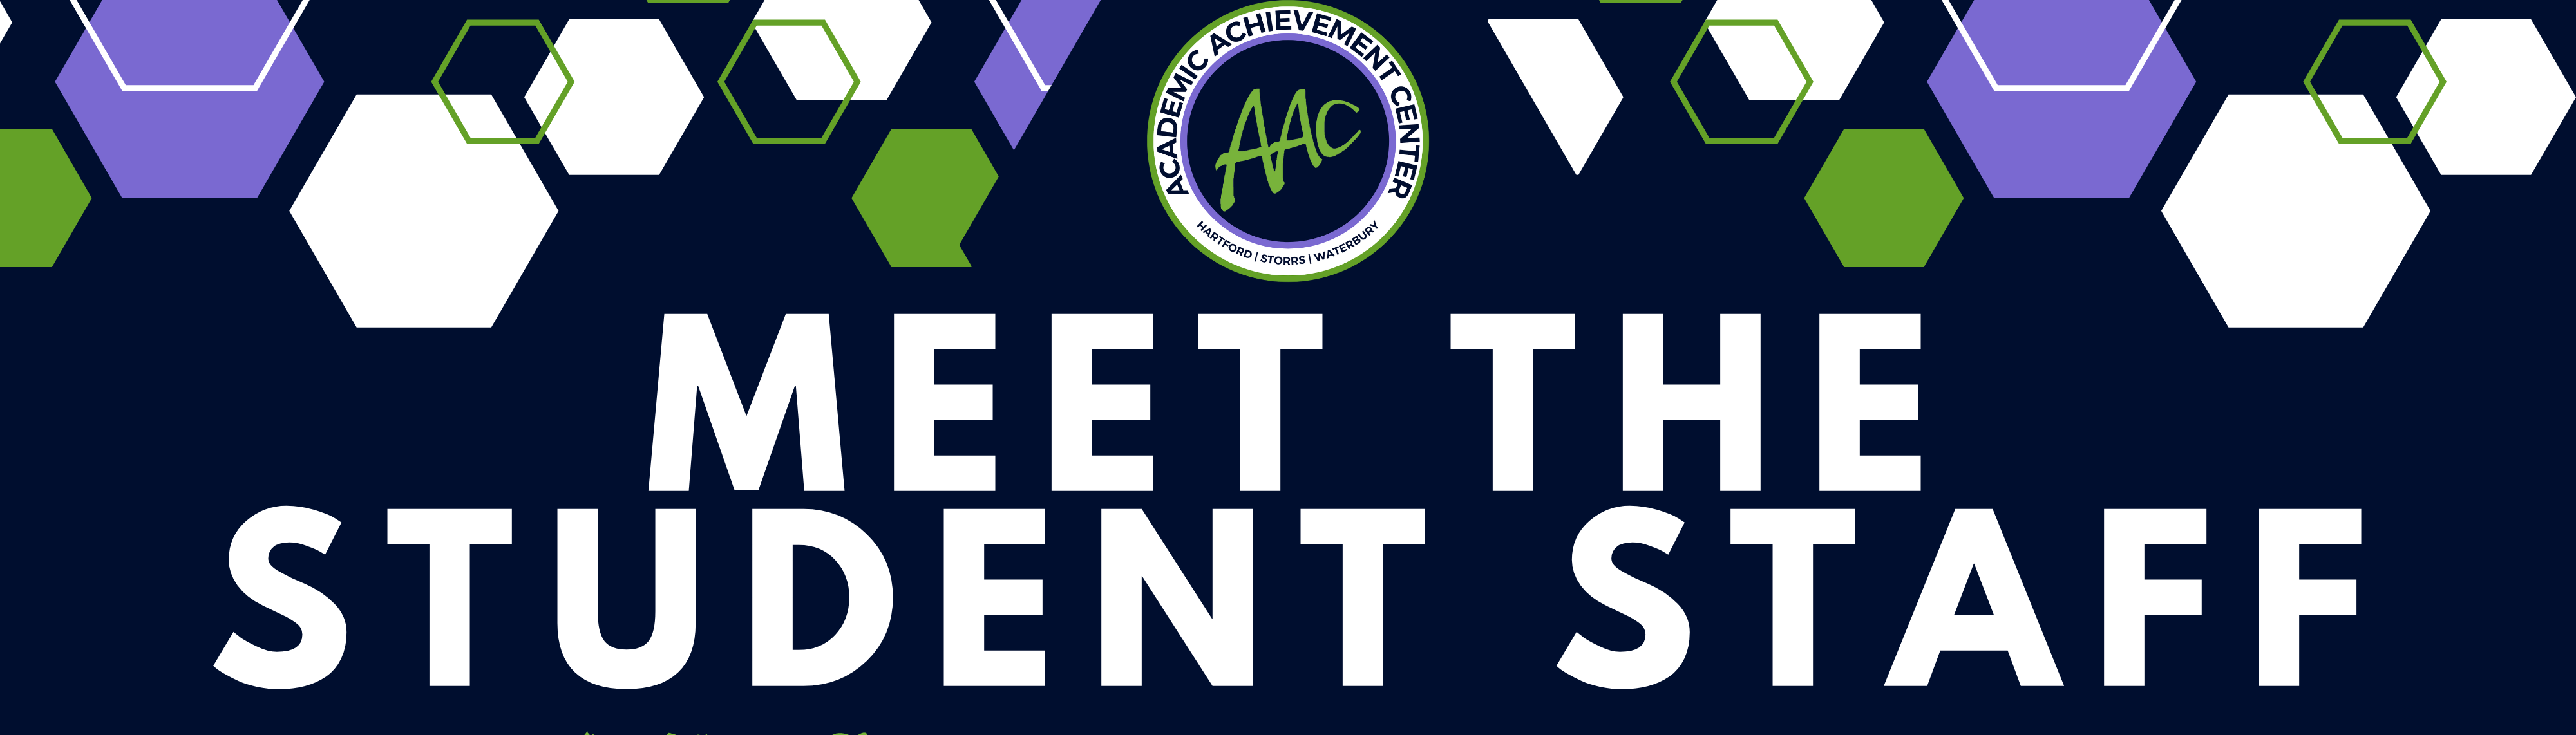 Hexagon design surrounding the AAC logo with the text Meet the student staff